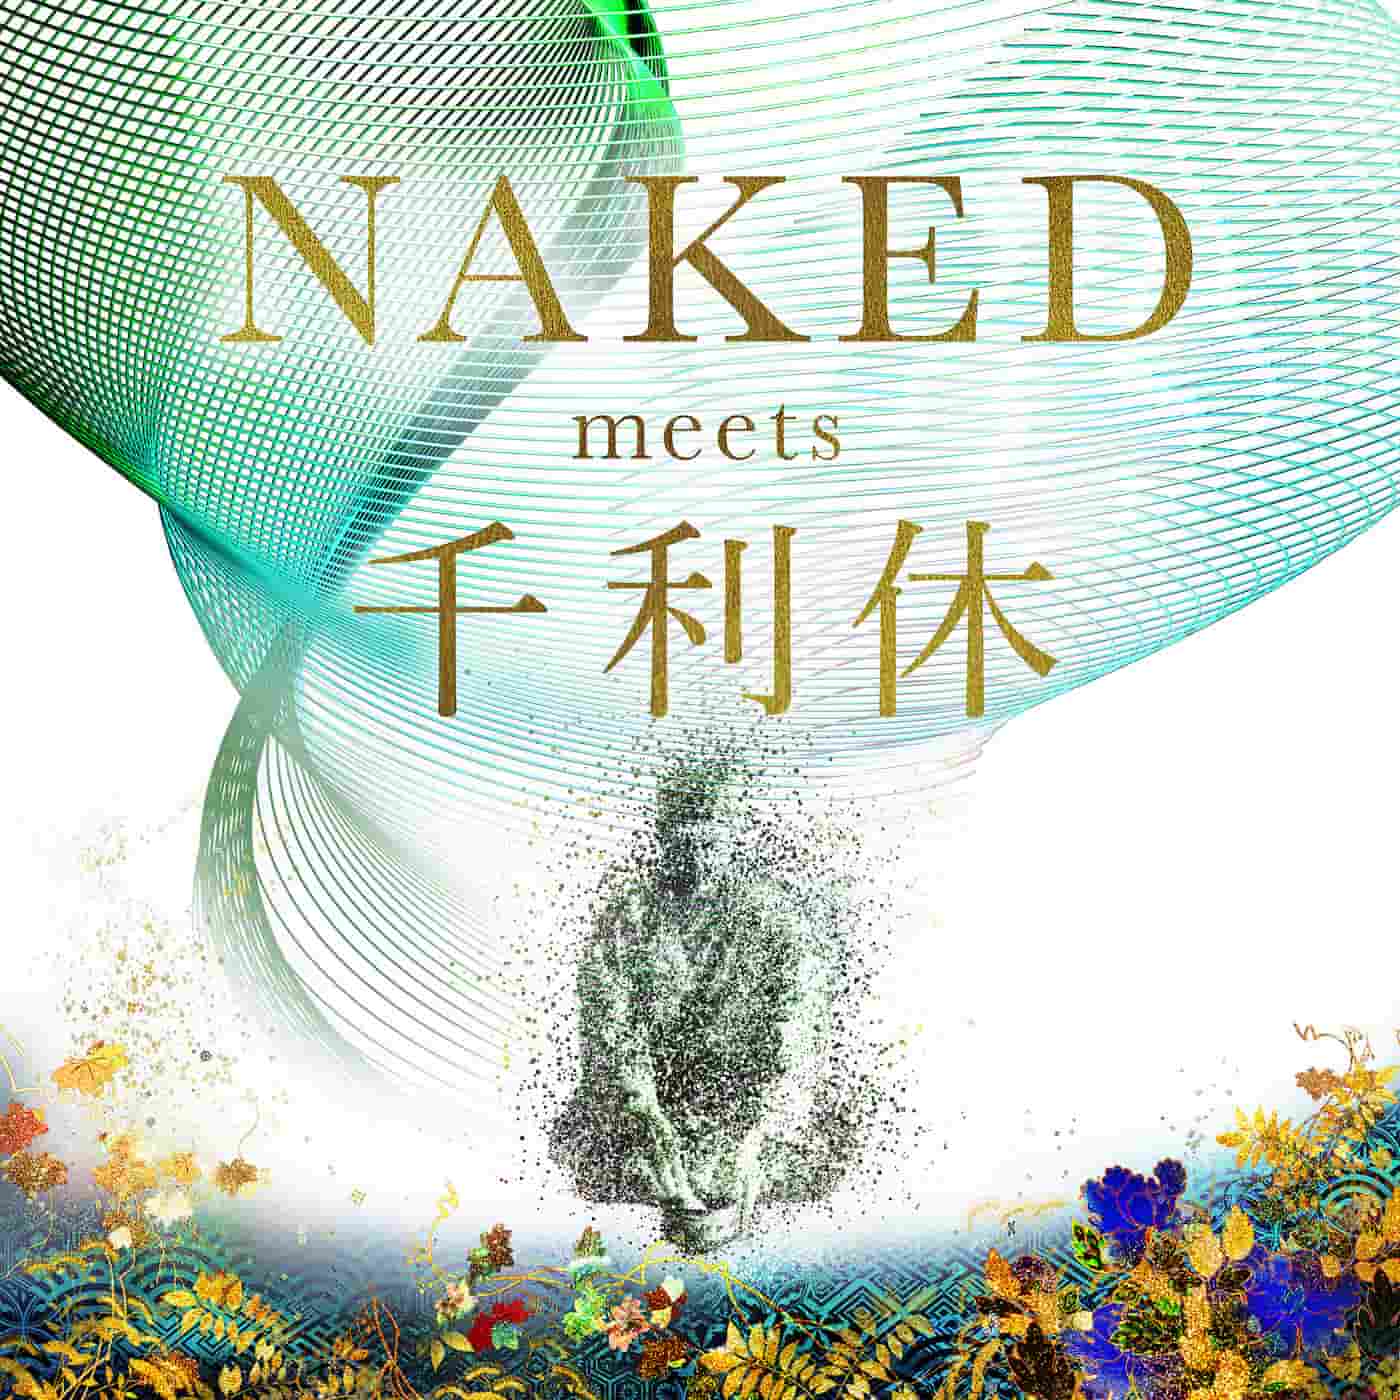 NAKED meets